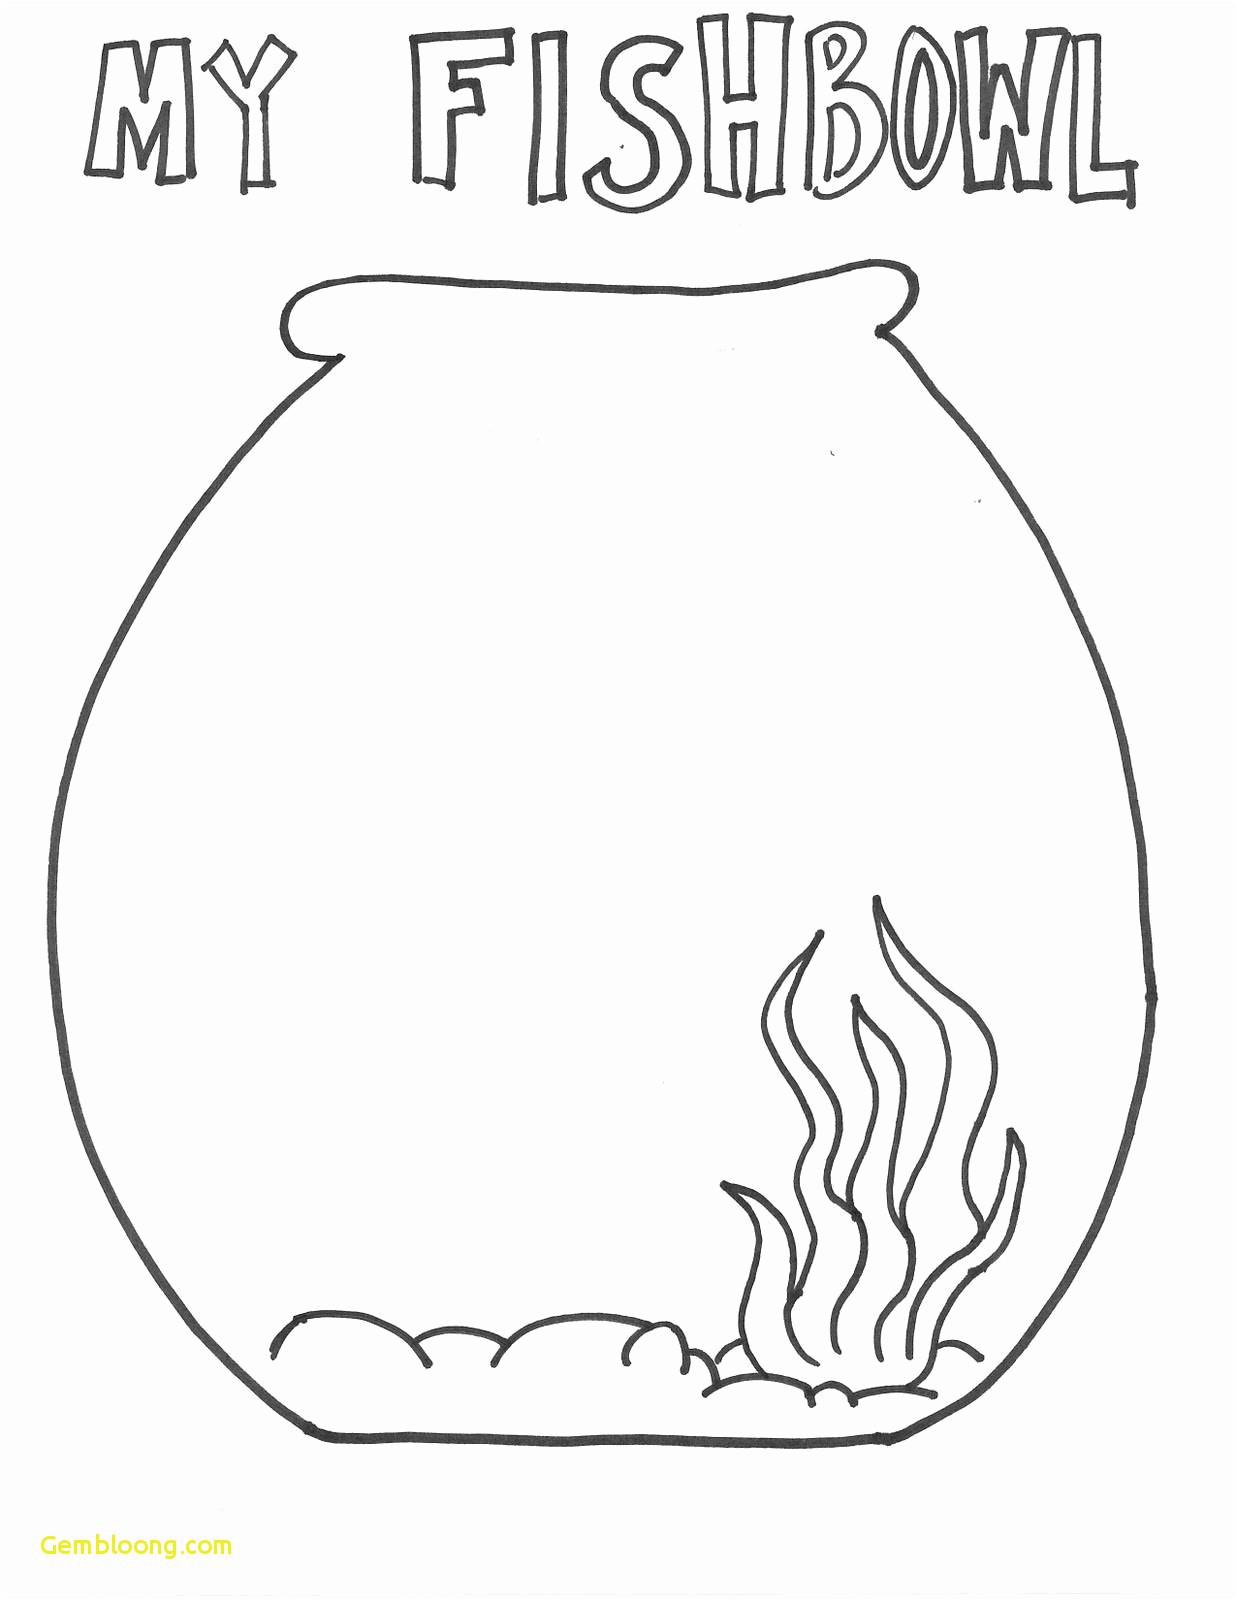 Empty Fish Bowl Coloring Page Awesome Fish Bowl Coloring Page Cool Coloring Pages Lovely Empty